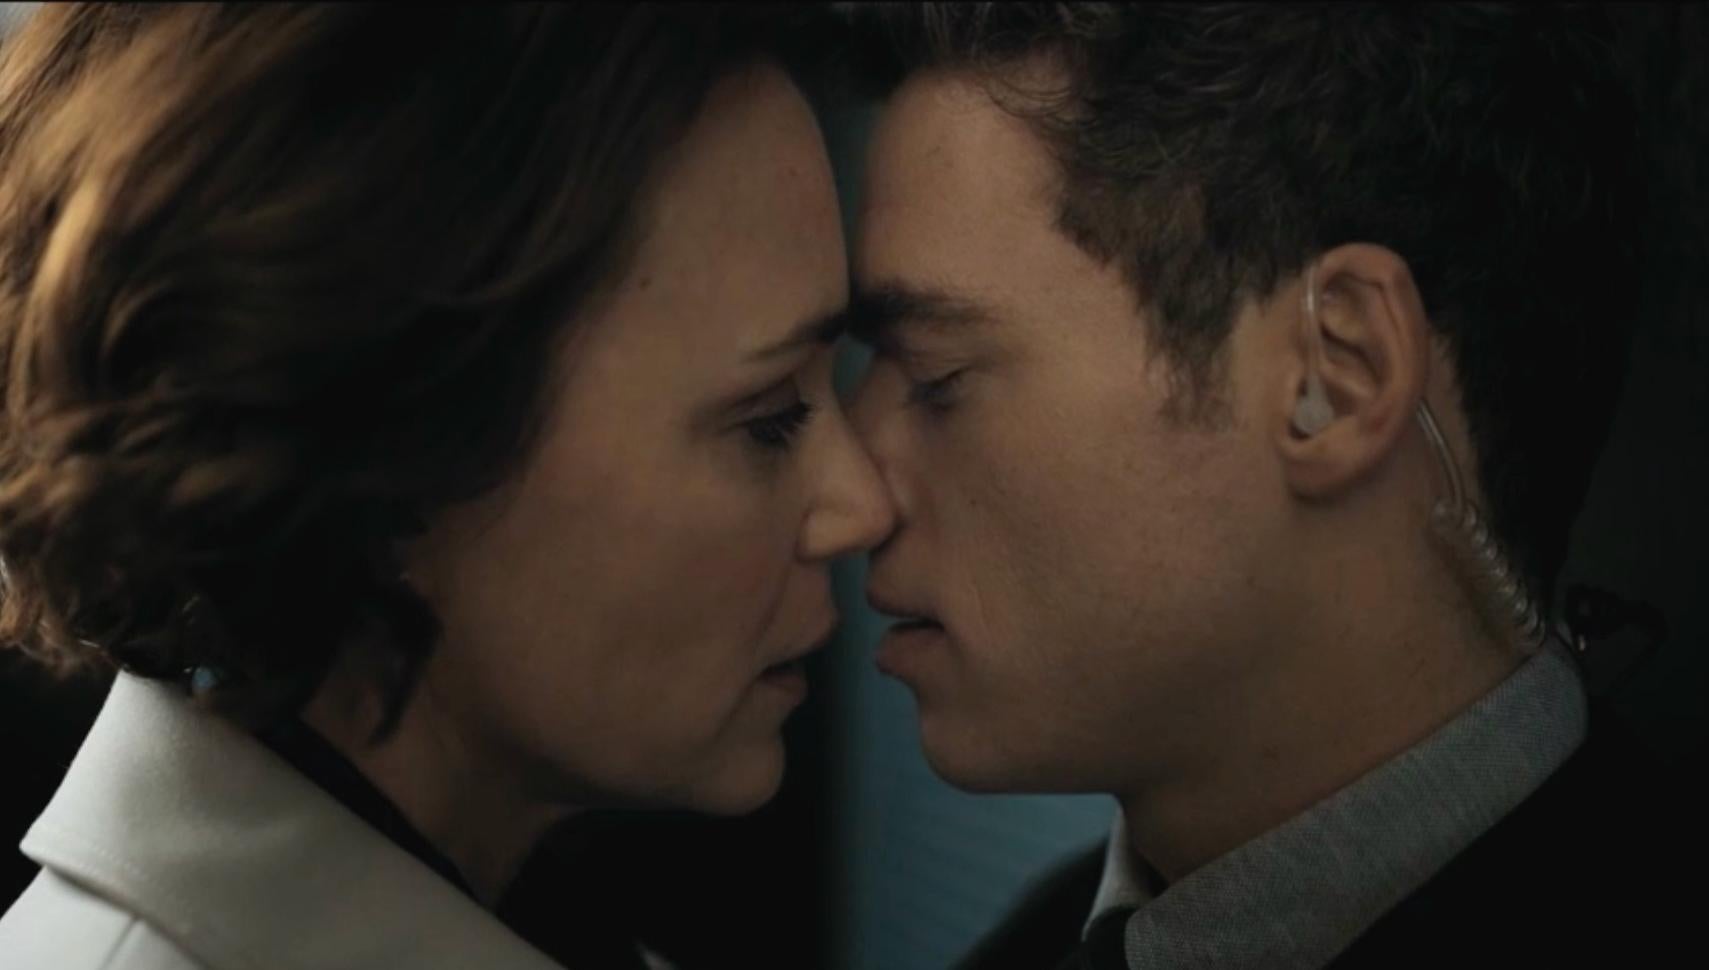 Keeley Hawes and Richard Madden in 'Bodyguard'